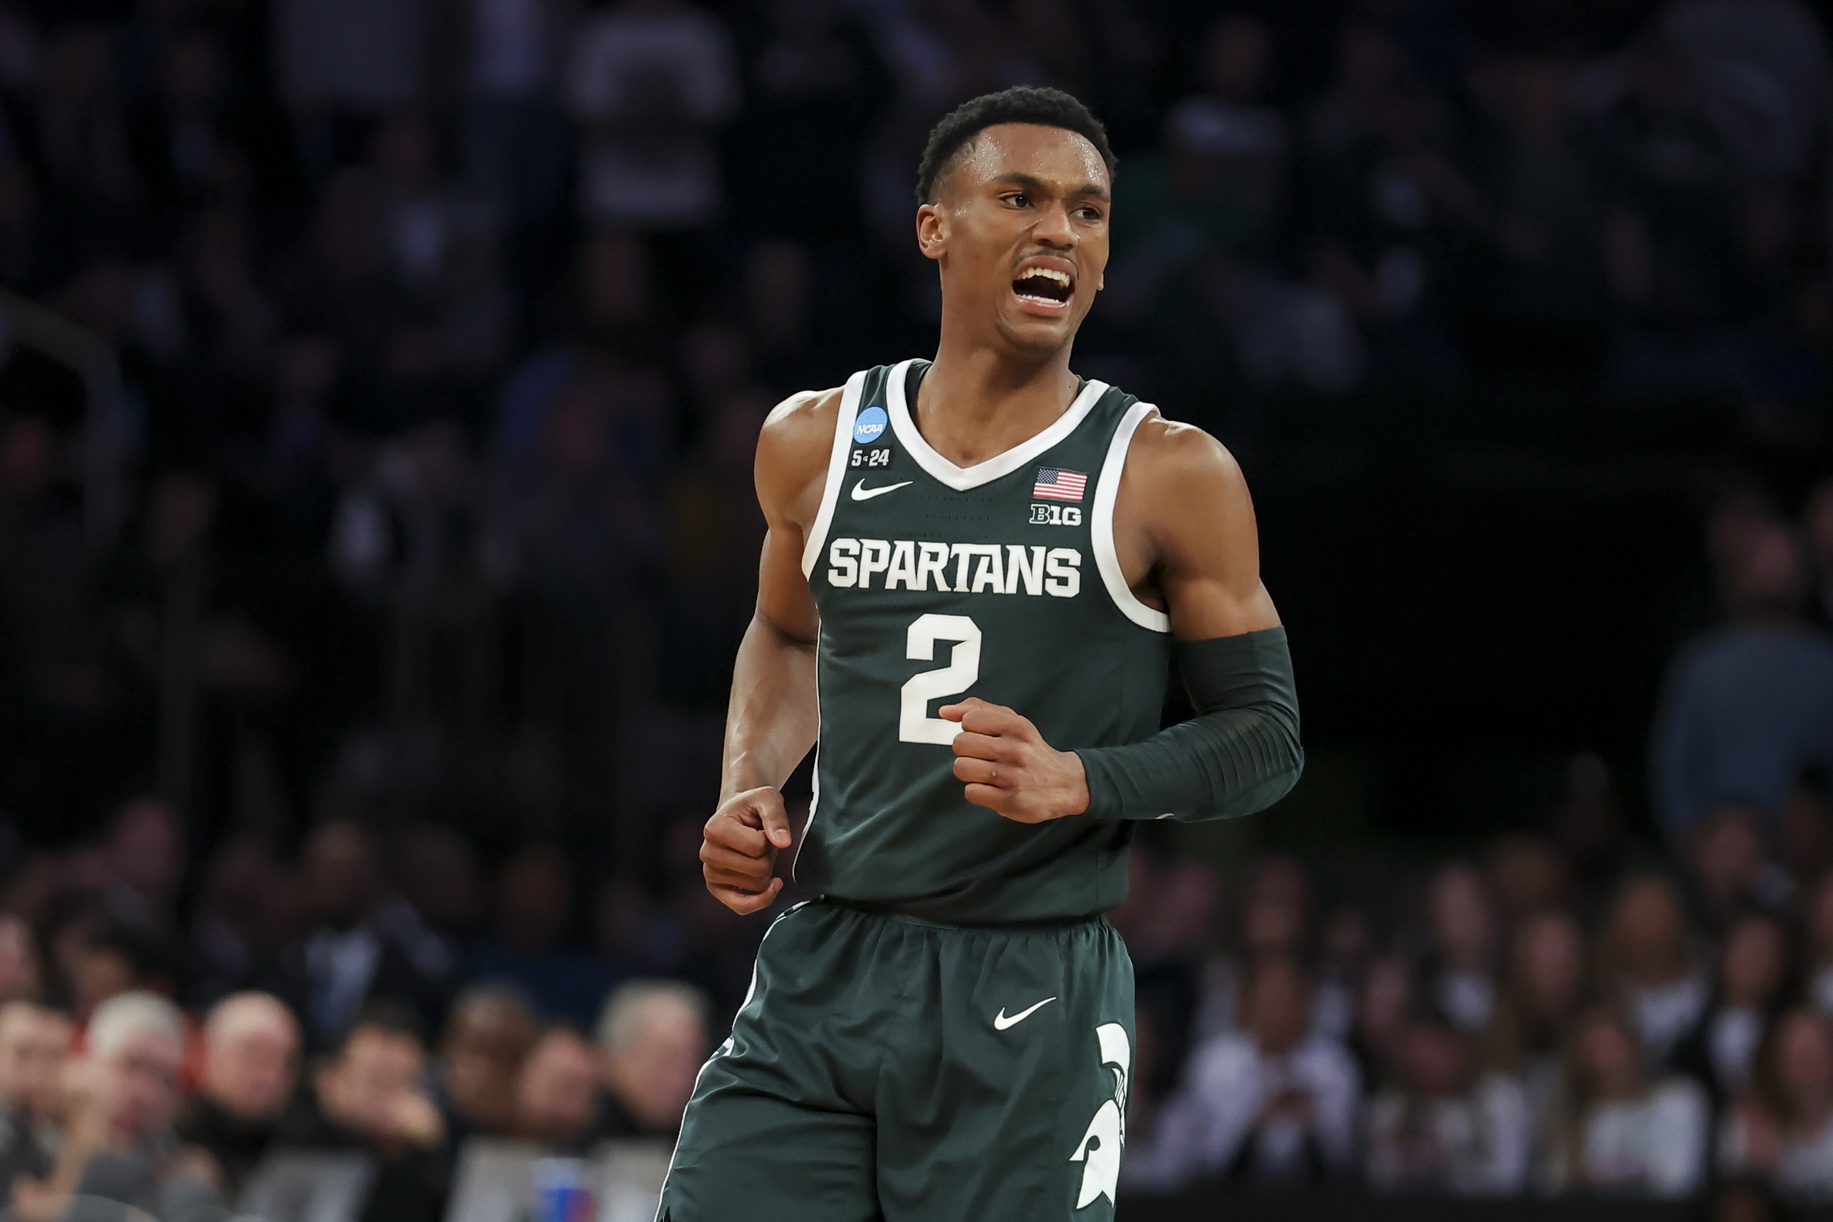 Michigan State basketball: Why Miles Bridges came back - Sports Illustrated